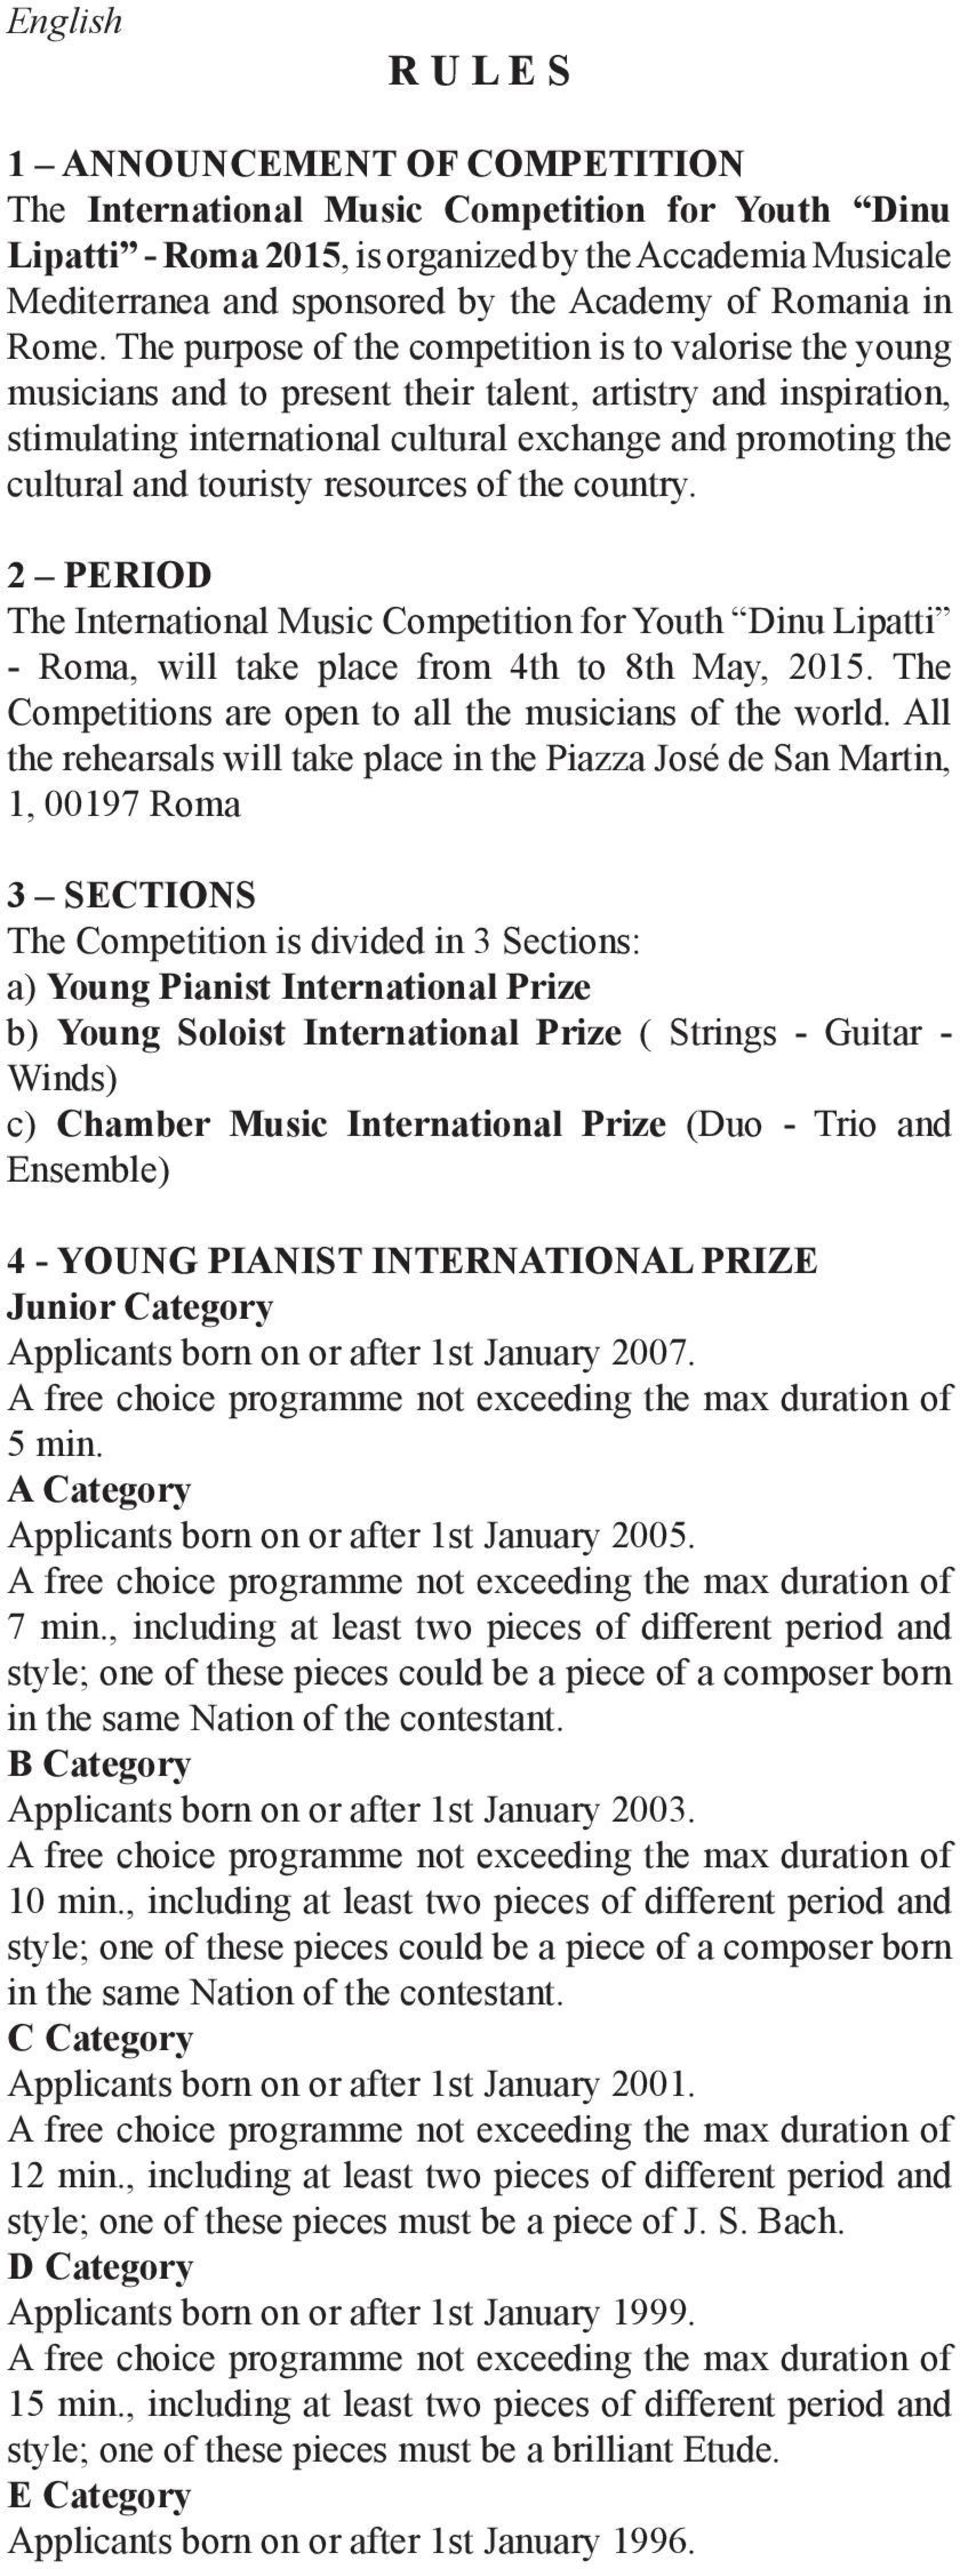 The purpose of the competition is to valorise the young musicians and to present their talent, artistry and inspiration, stimulating international cultural exchange and promoting the cultural and